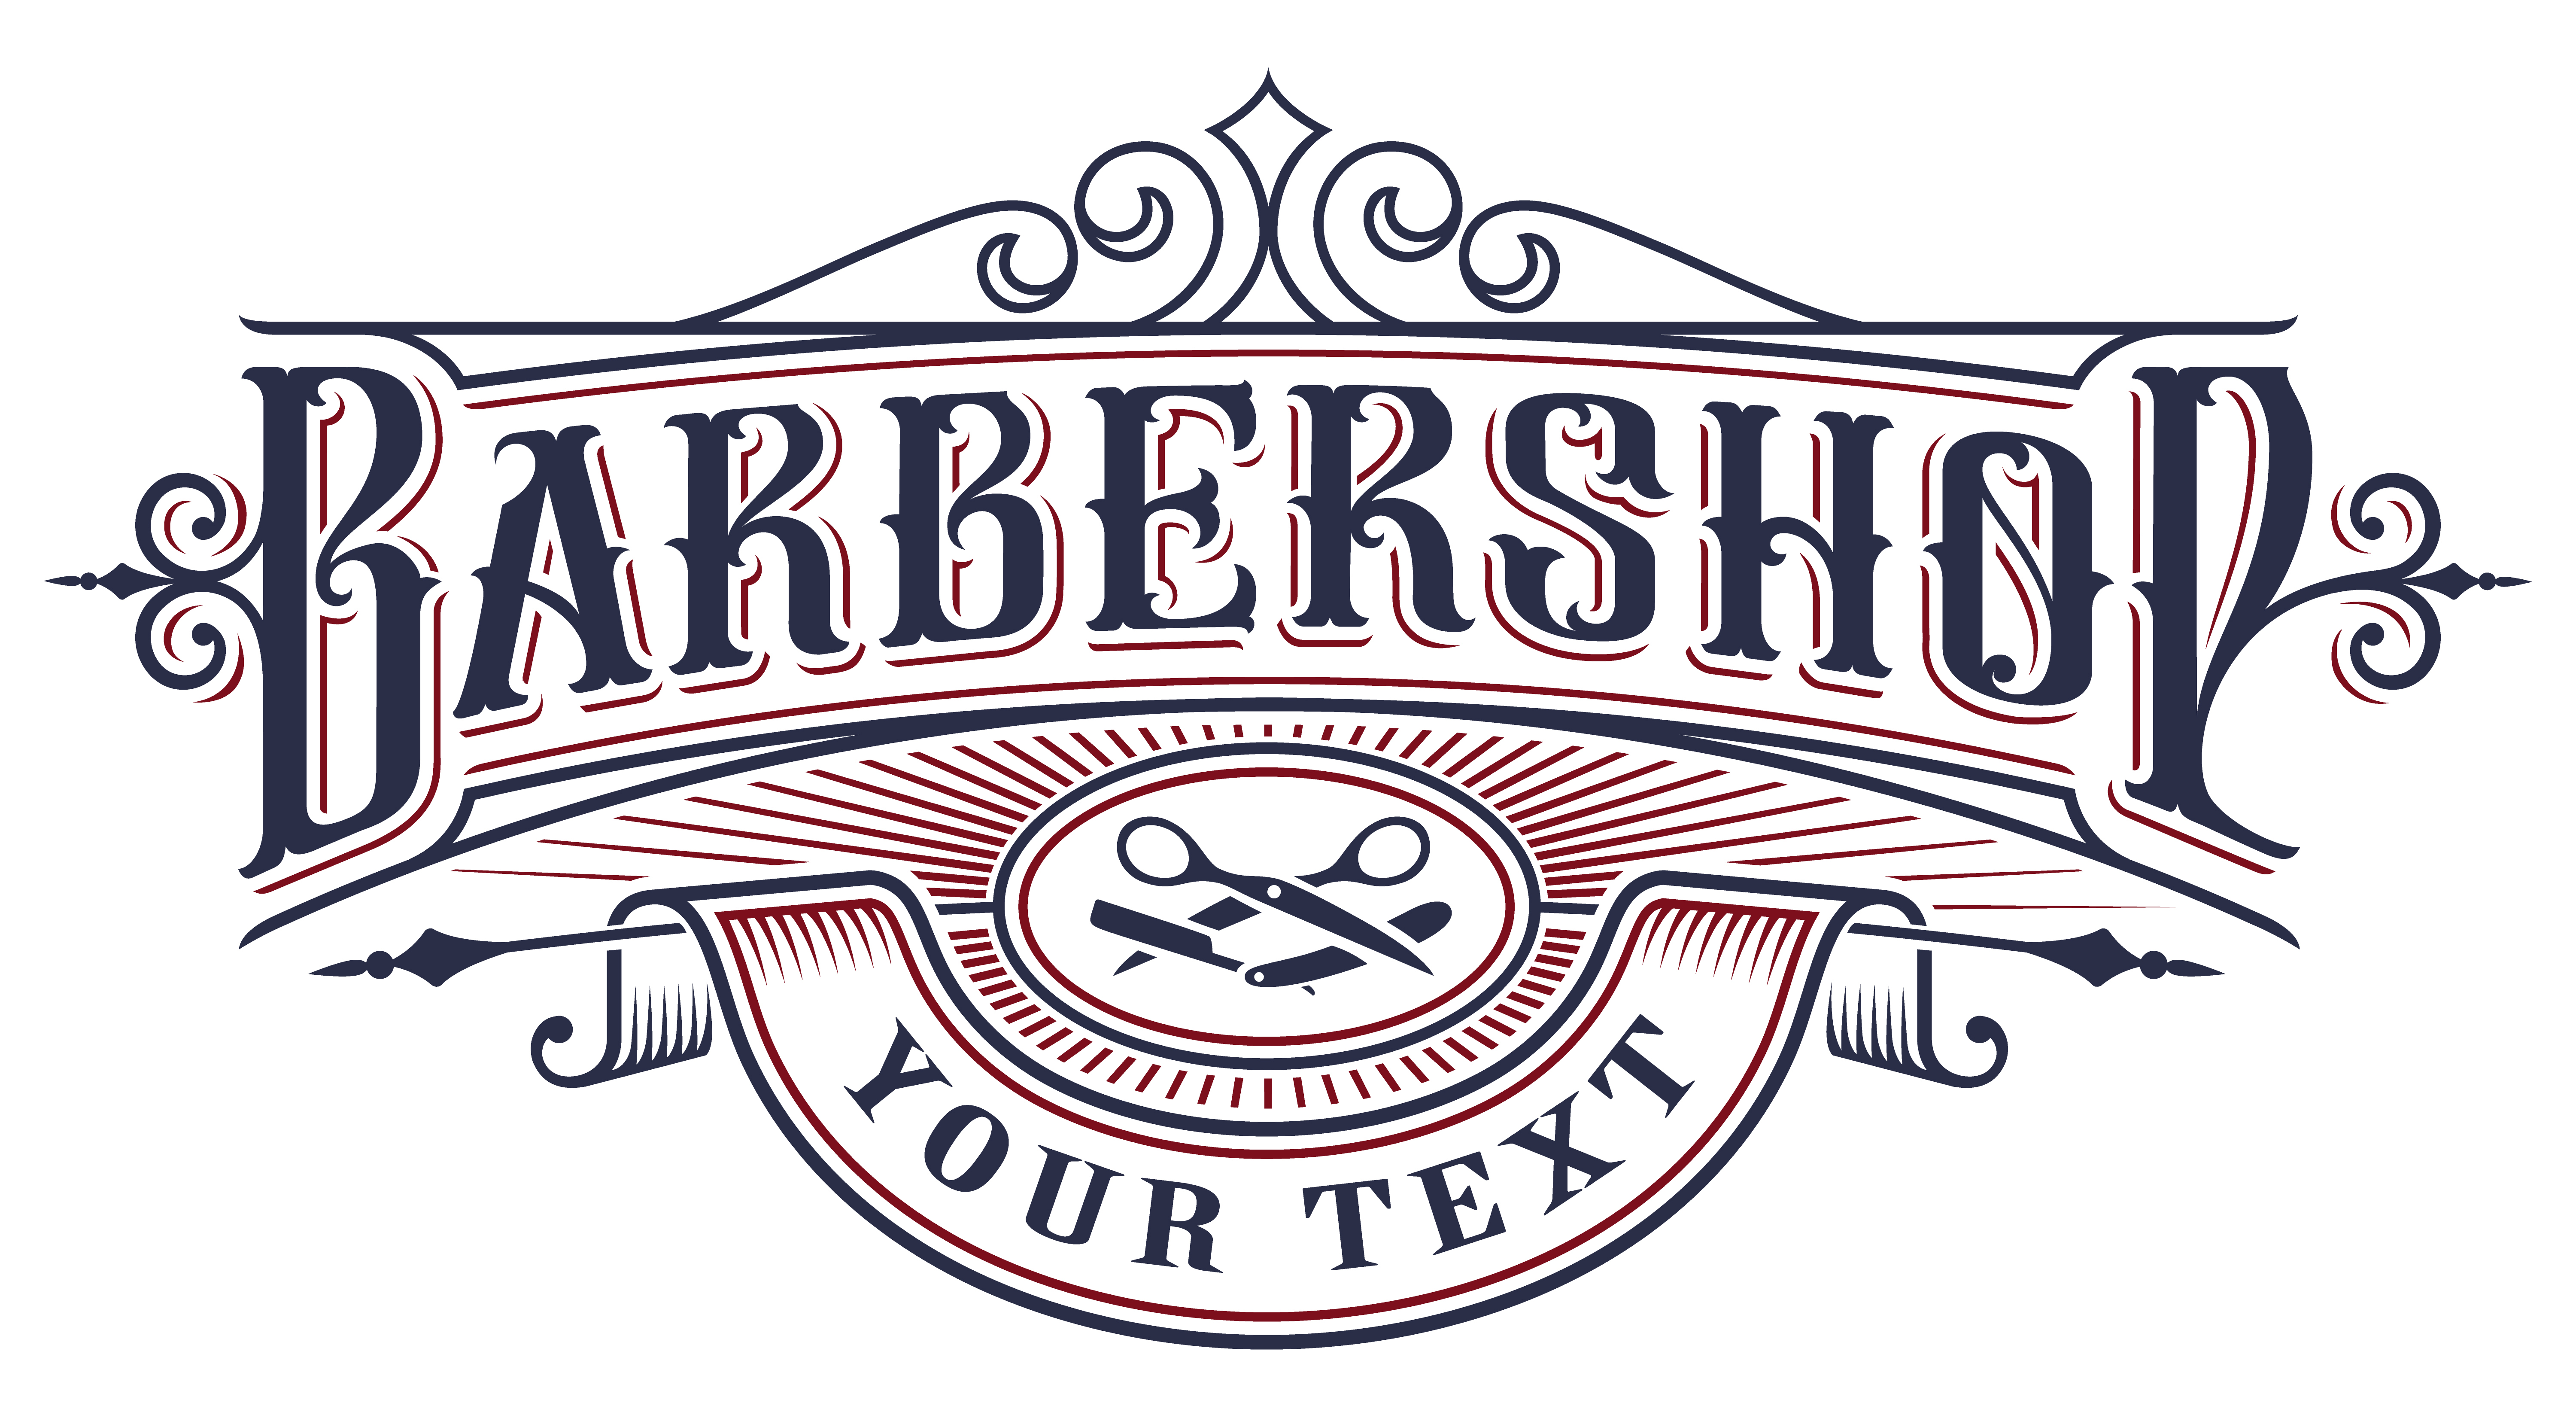 Download Barber Shop Logo Vector at Vectorified.com | Collection of ...